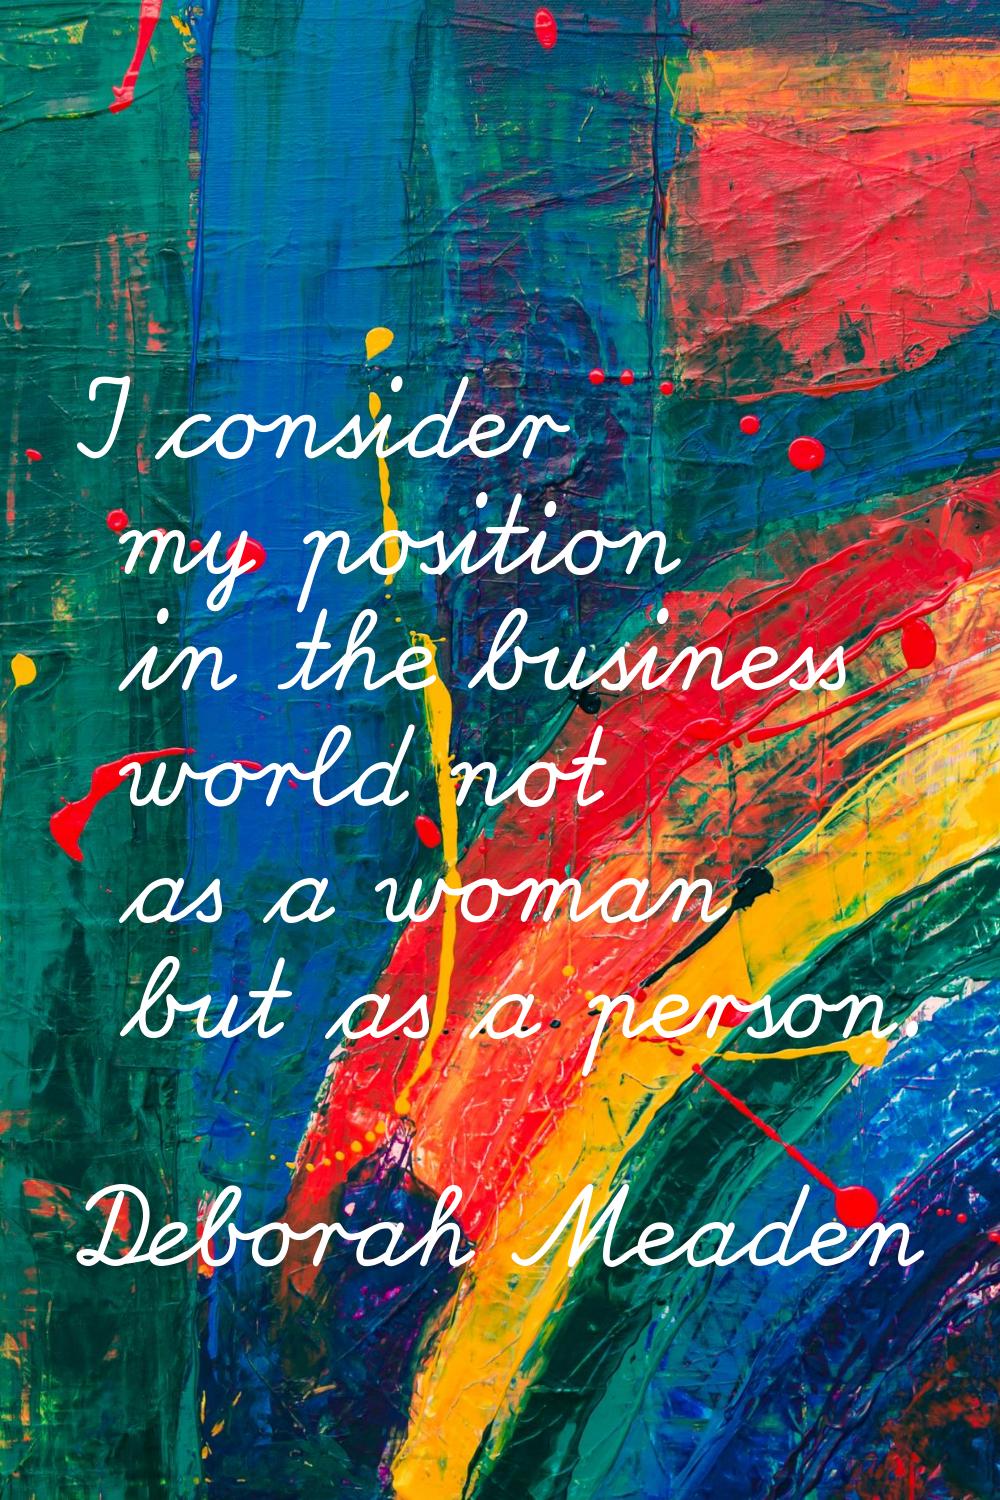 I consider my position in the business world not as a woman but as a person.